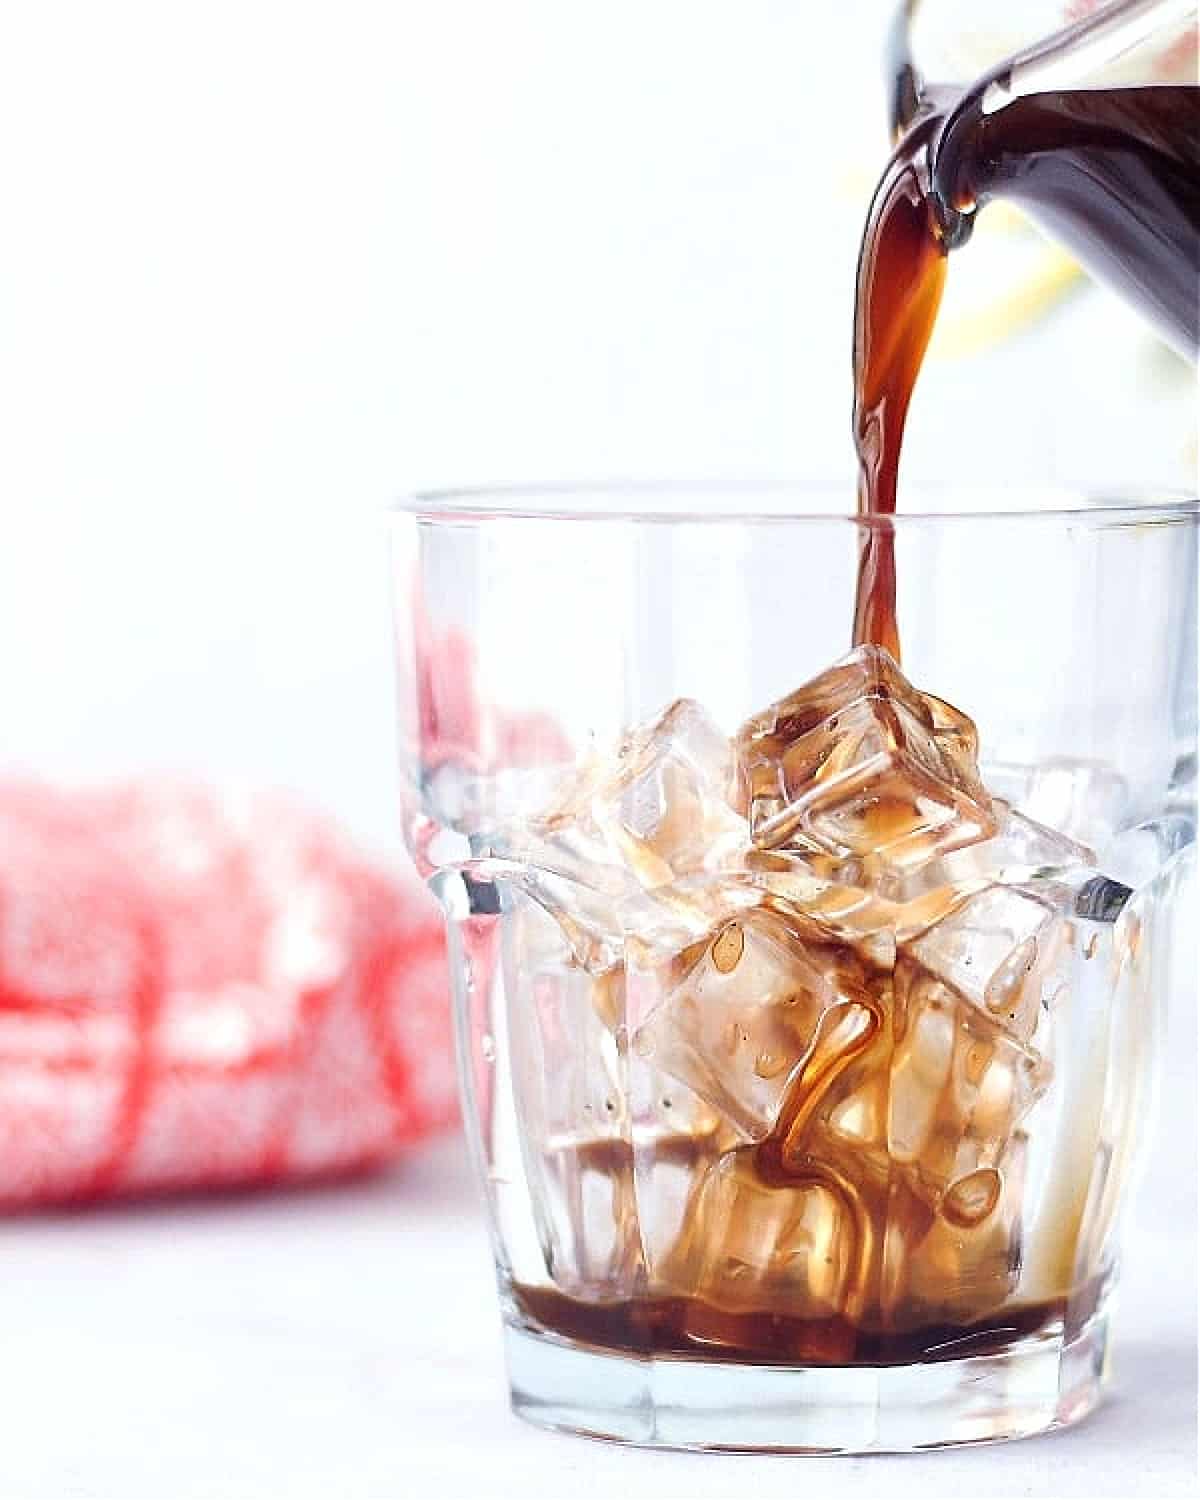 Coconut cold brew coffee being poured into a glass over ice.